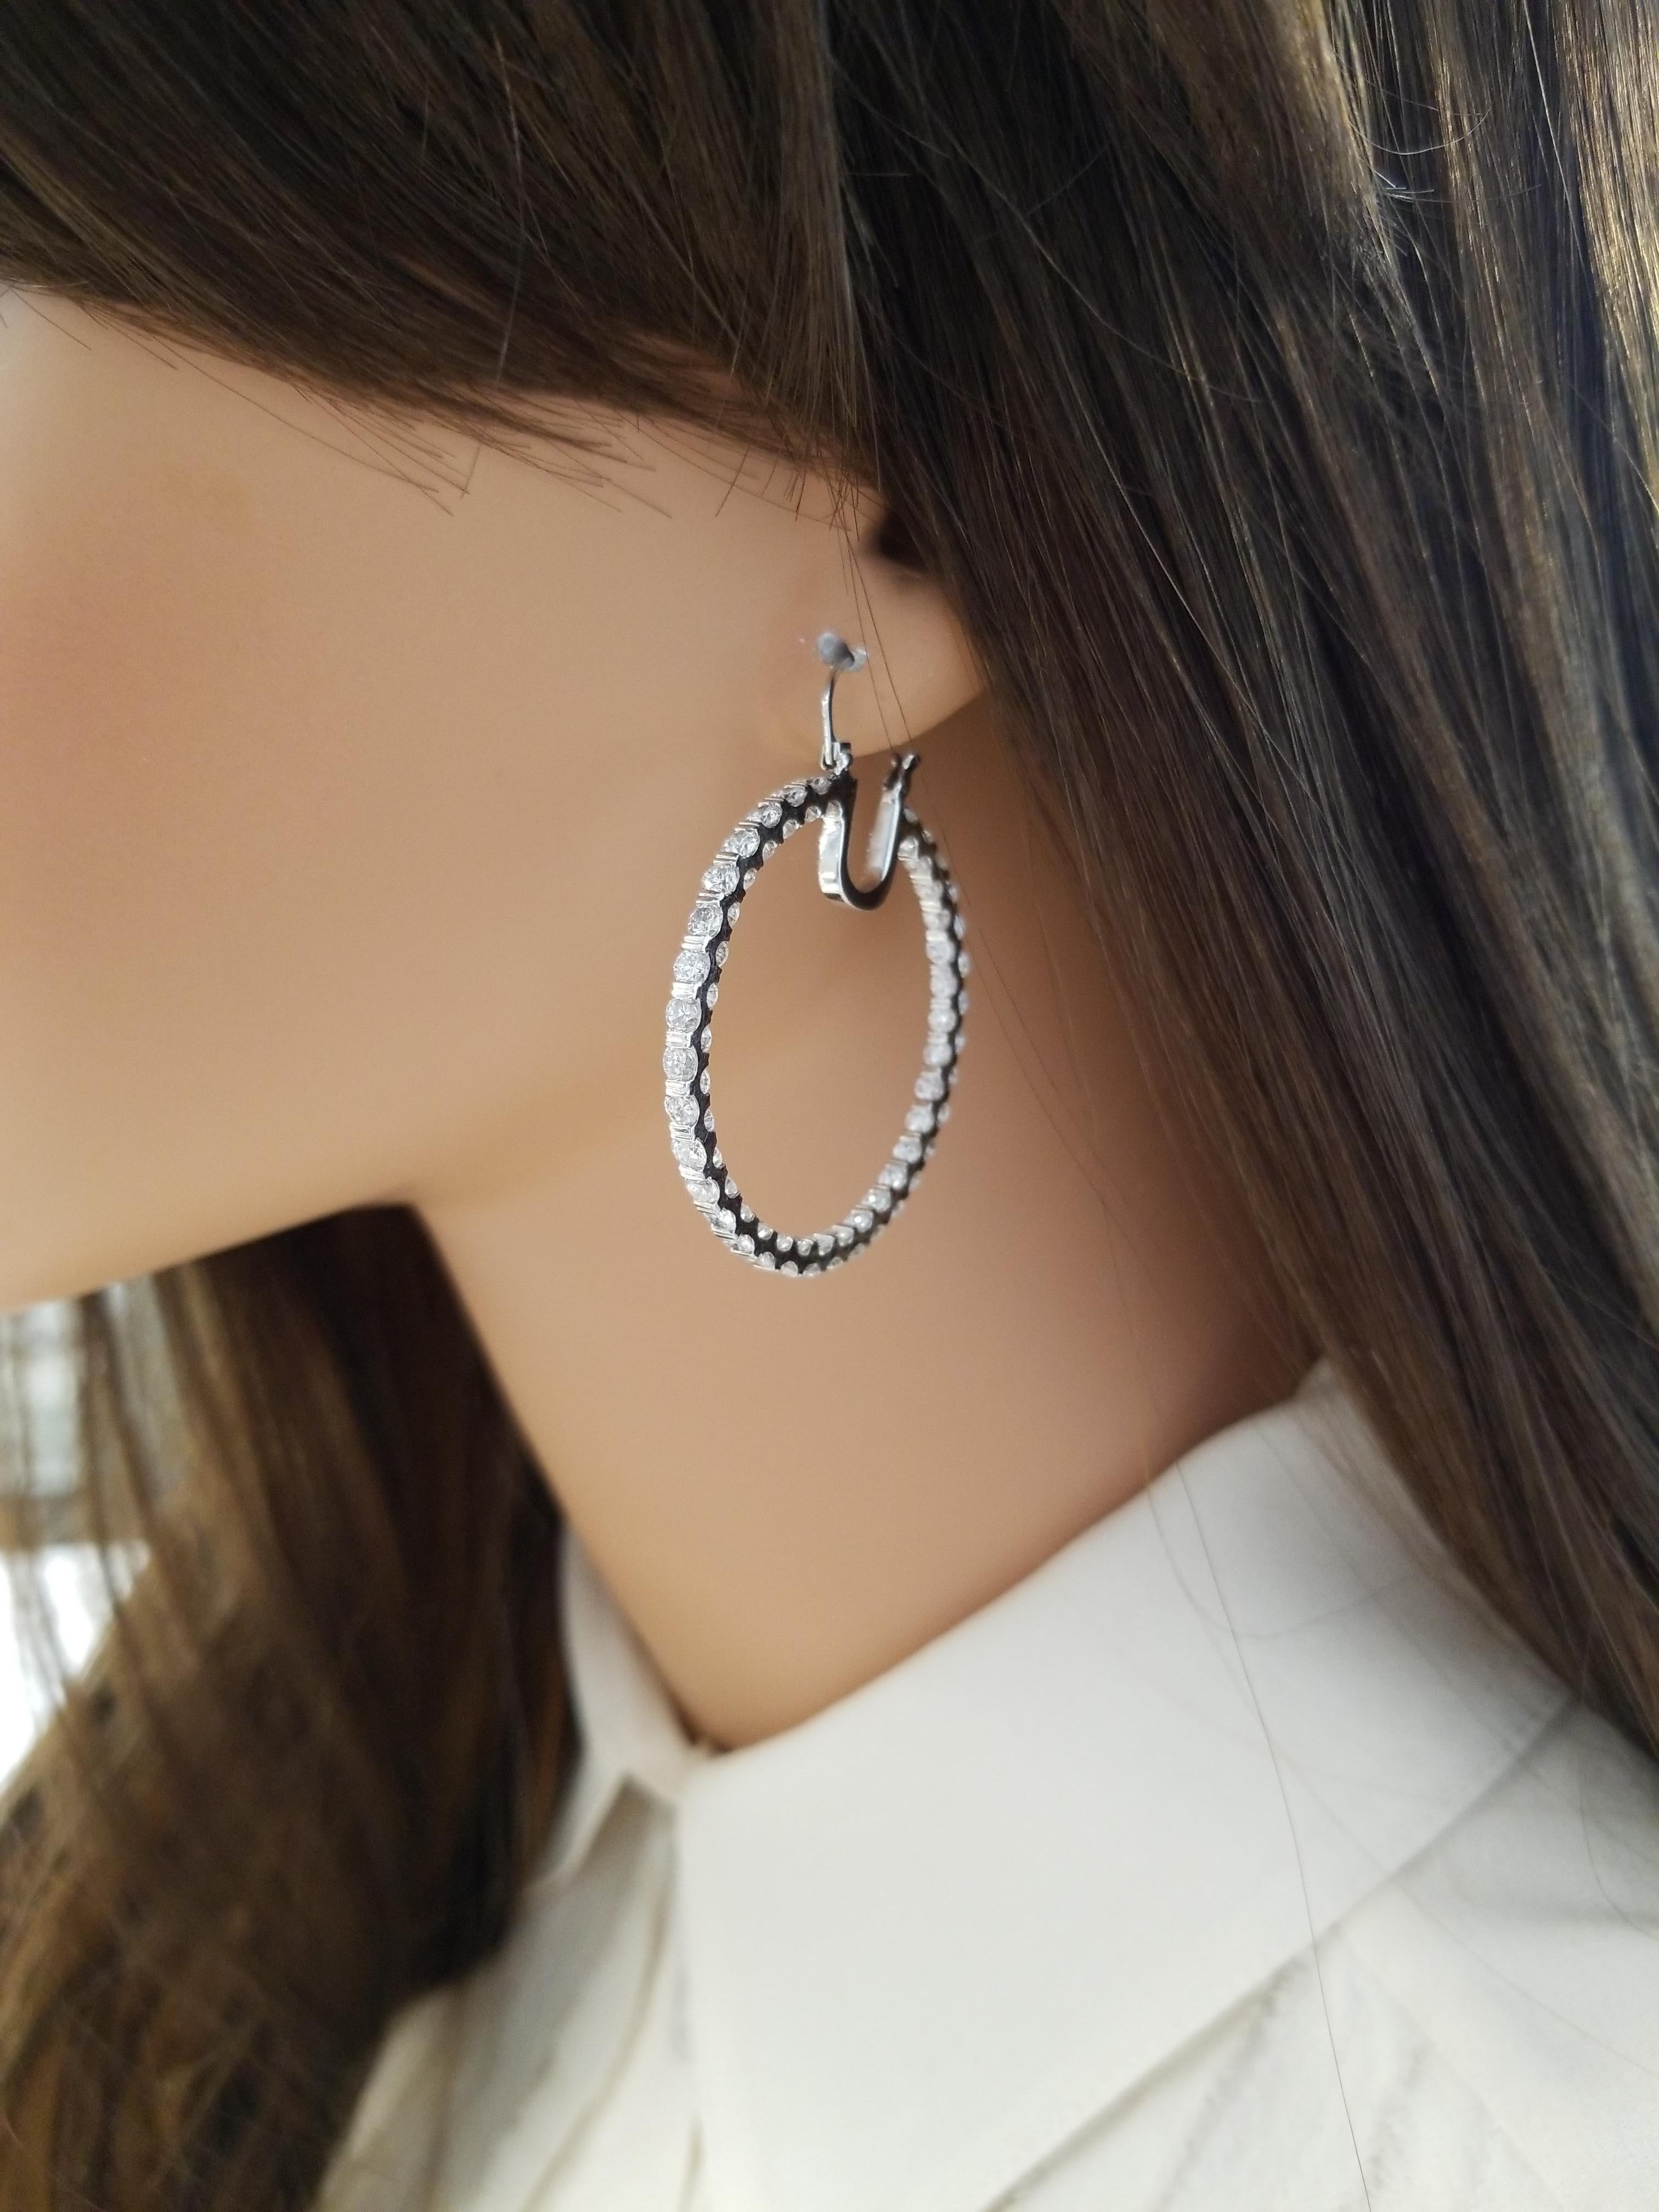 Nothing says luxury like an incredible pair of diamond hoop earrings for that special someone in mind. These stunning brightly polished 14 karat white gold inside out hoop earrings feature a total of 160 round brilliant cut diamonds prong set on the